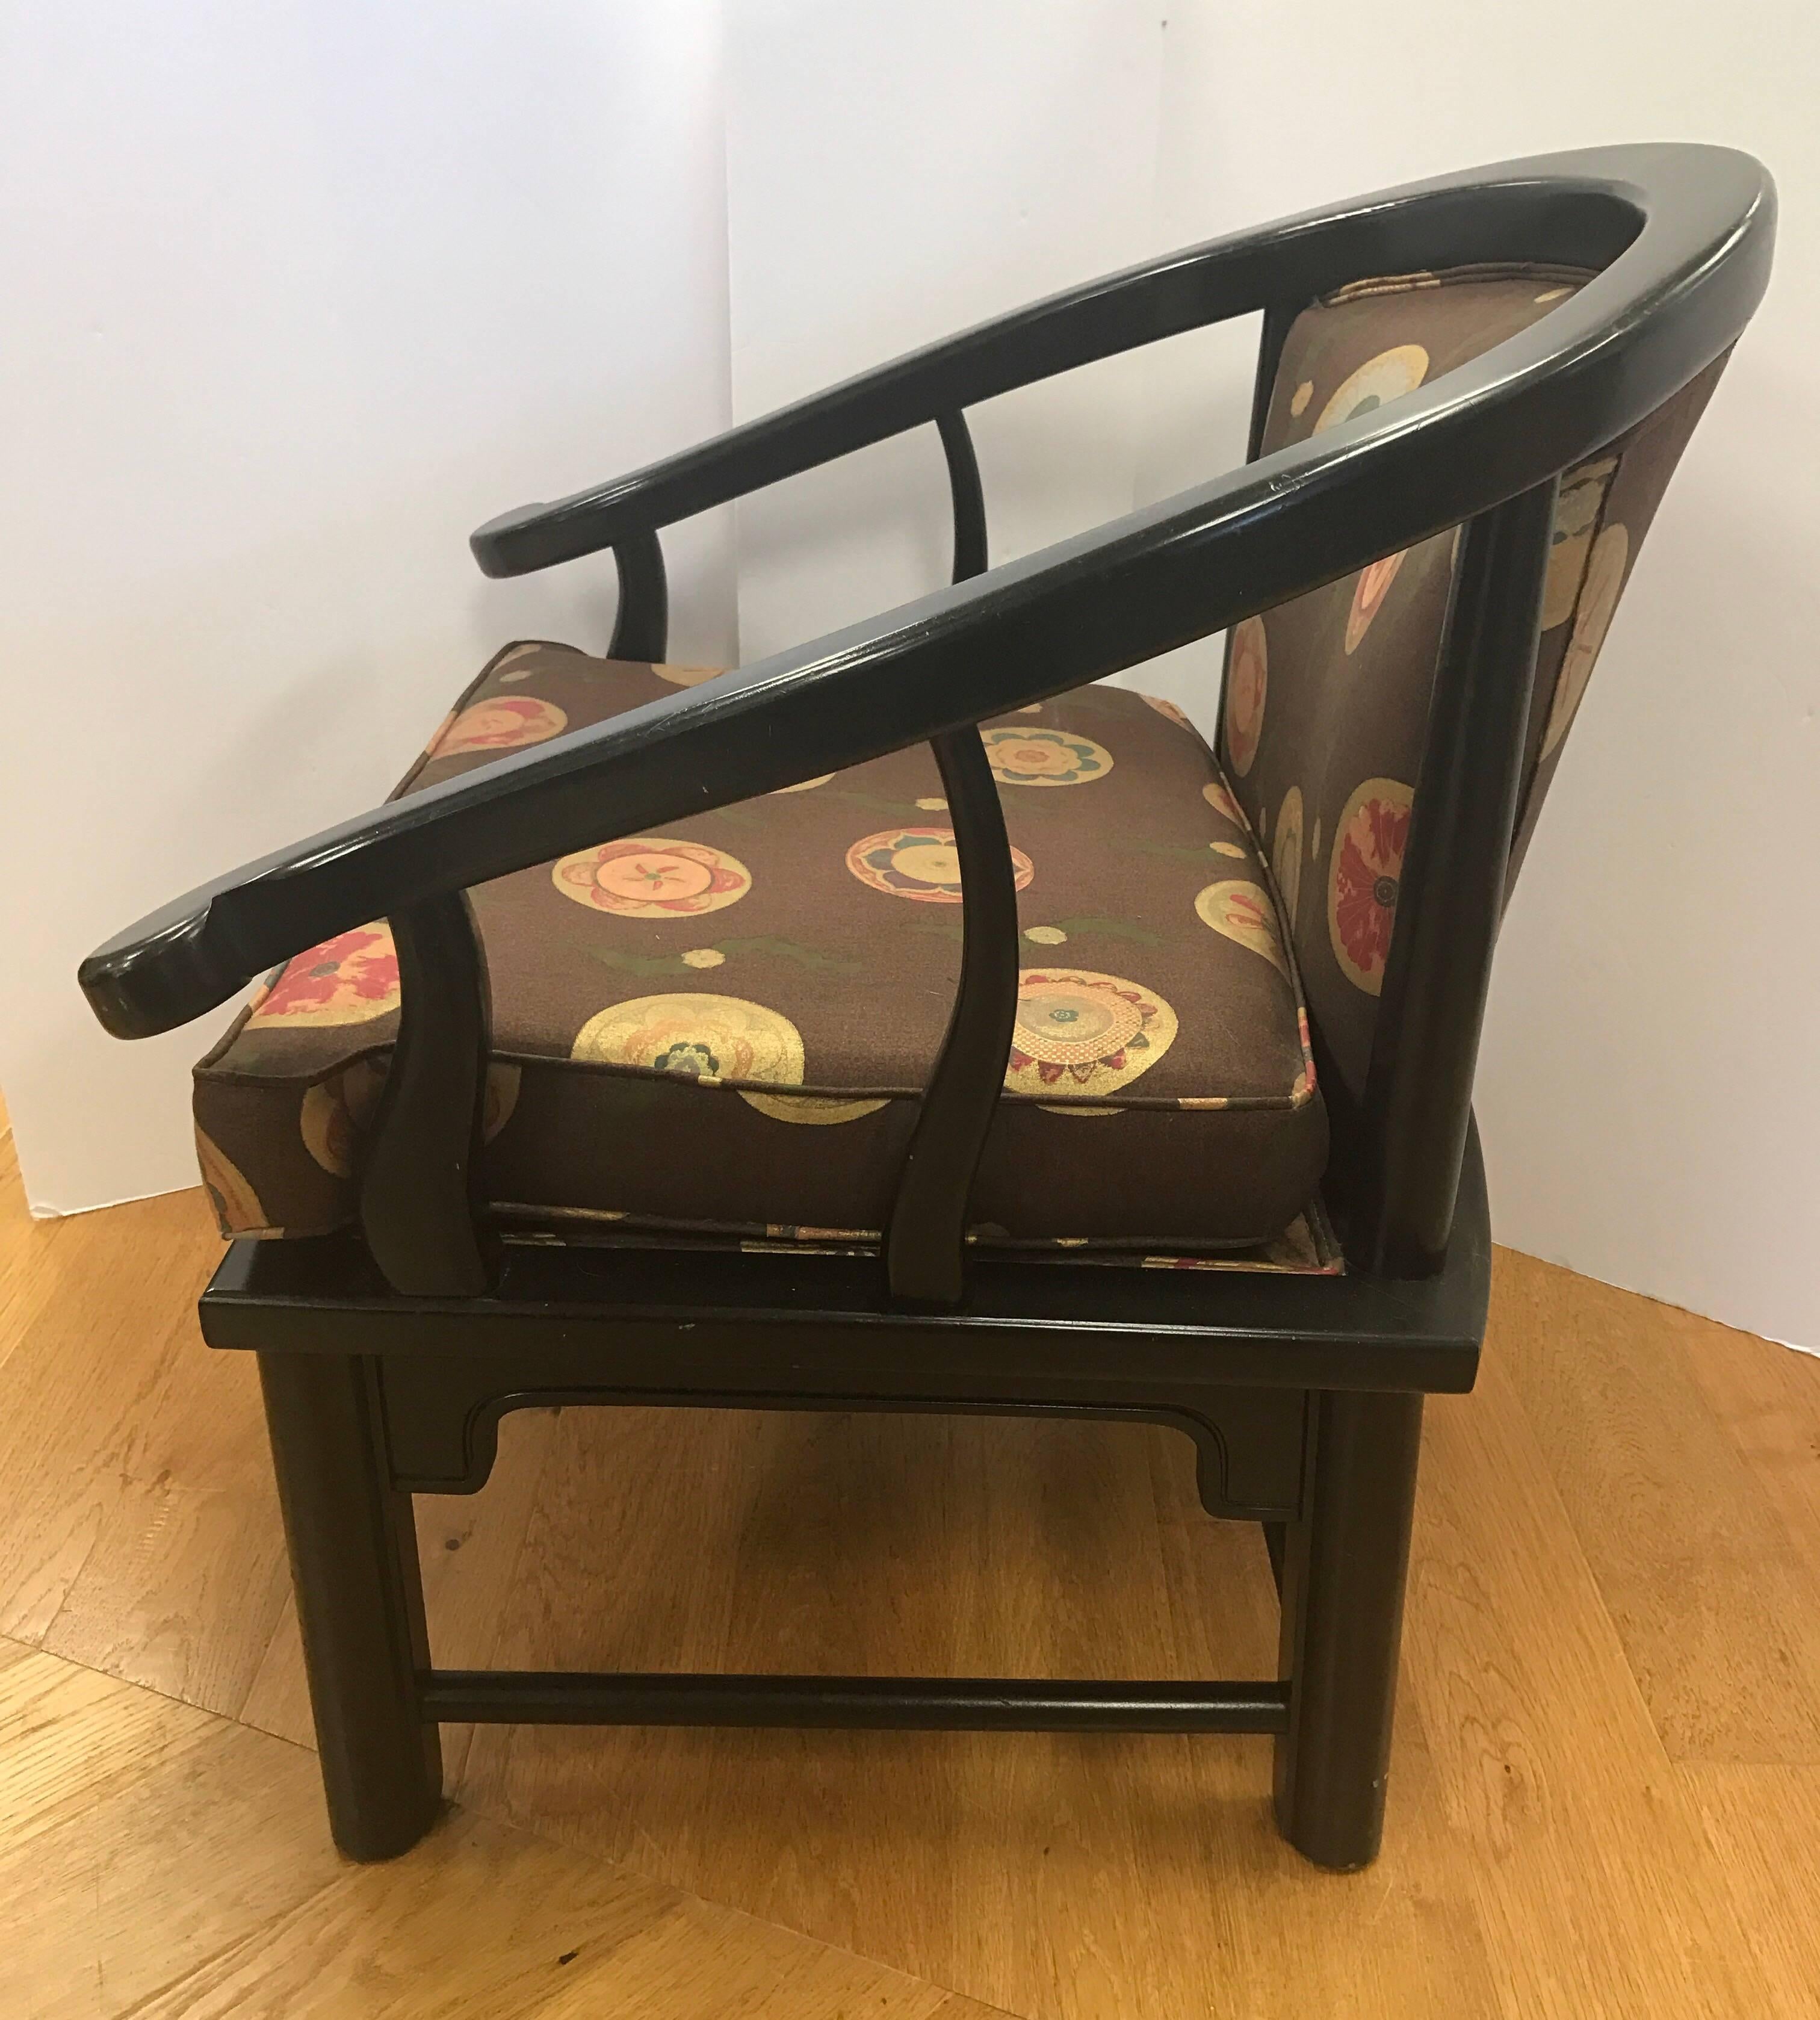 Late 20th Century Mid-Century Modern Chinese Black Horseshoe Chair James Mont Style